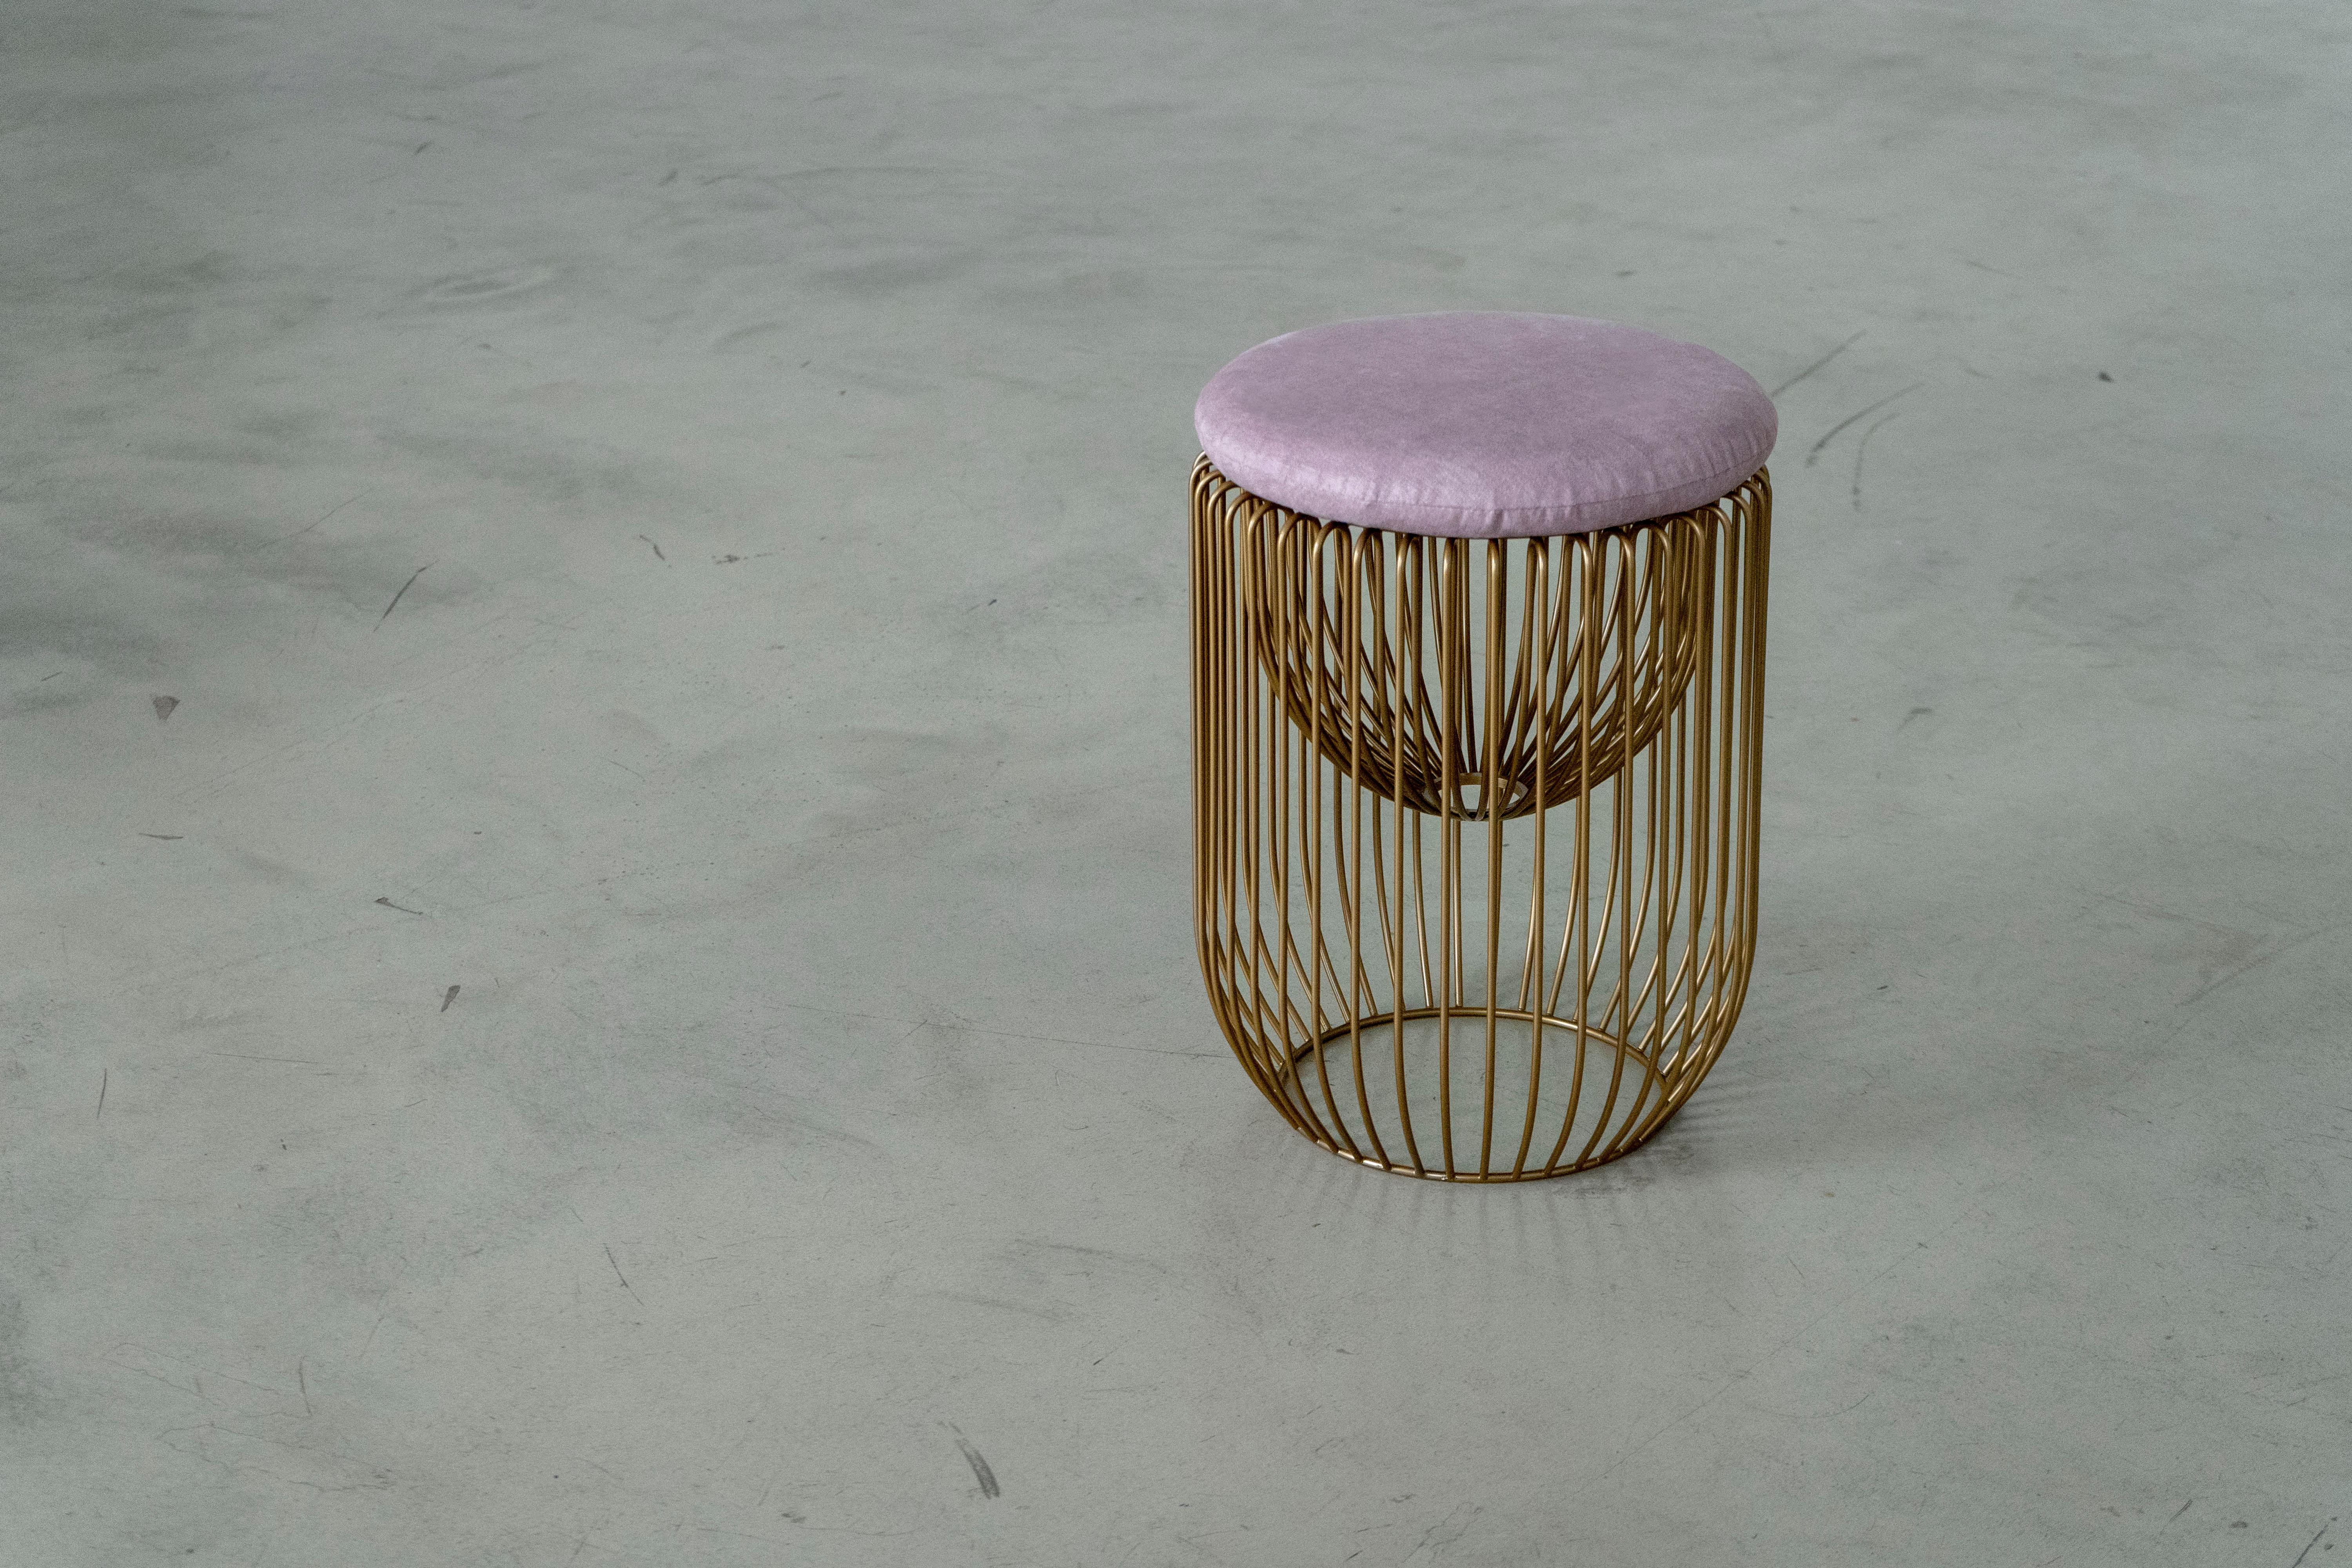 Steel Nido Stool with Upholstered Pillow in Pink